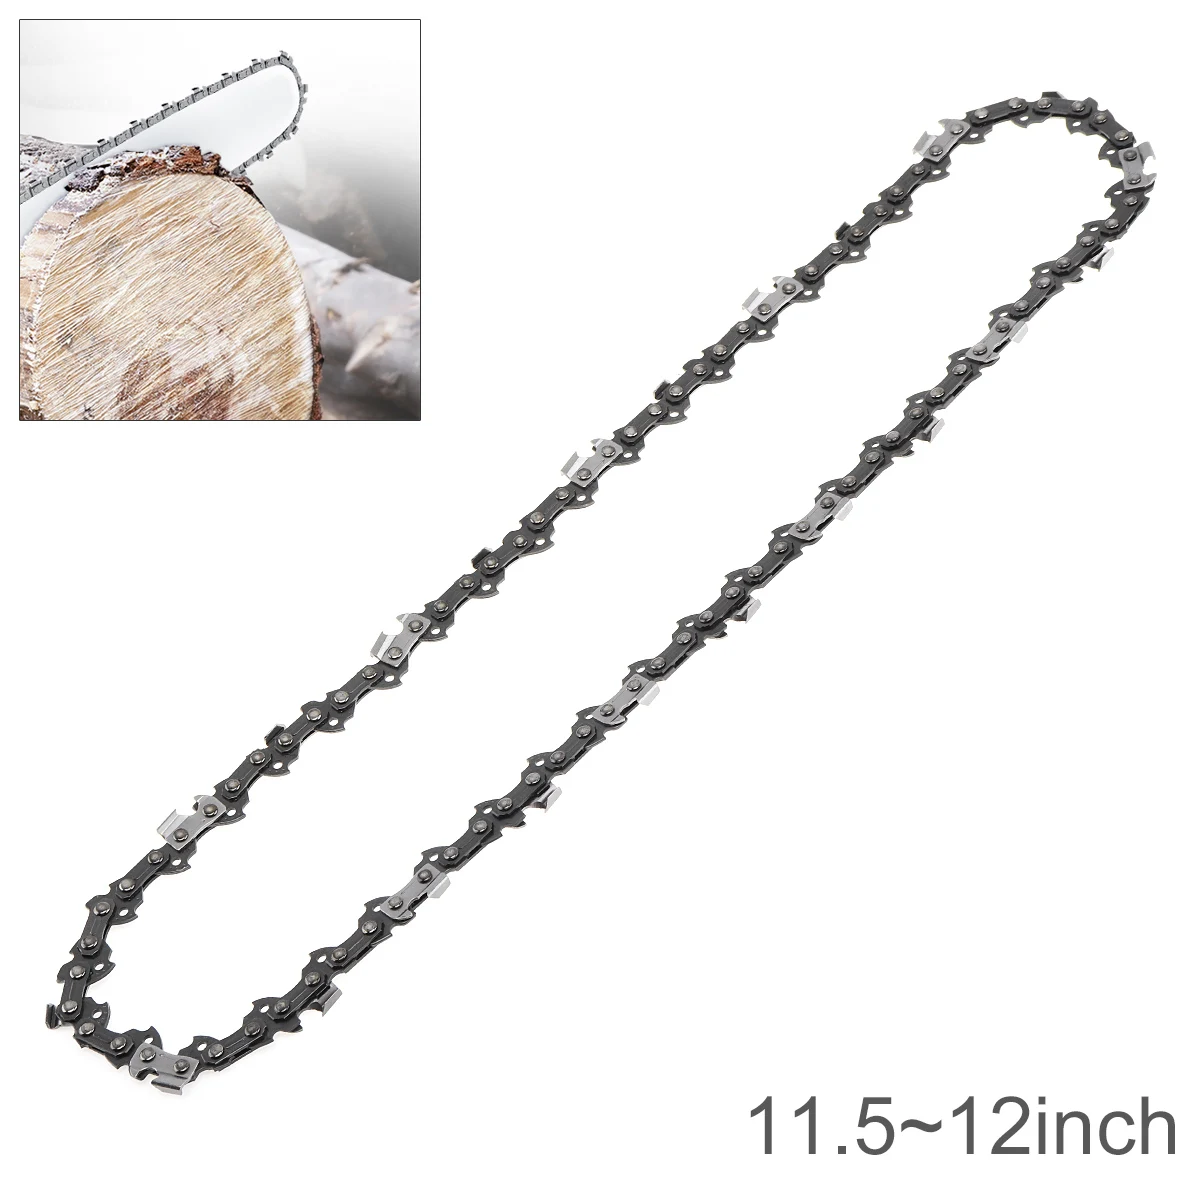 11.5-12'' Chainsaw Chain Blade Wood Cutting Chainsaw Parts 50-52 Drive 3/8 Pitch Chainsaw Saw Mill Chain Tool Accessories extruder 3d printer parts dual drive bowden direct extruder for pla abs petg tpu tpe nylon carbon fiber wood filament decelerate